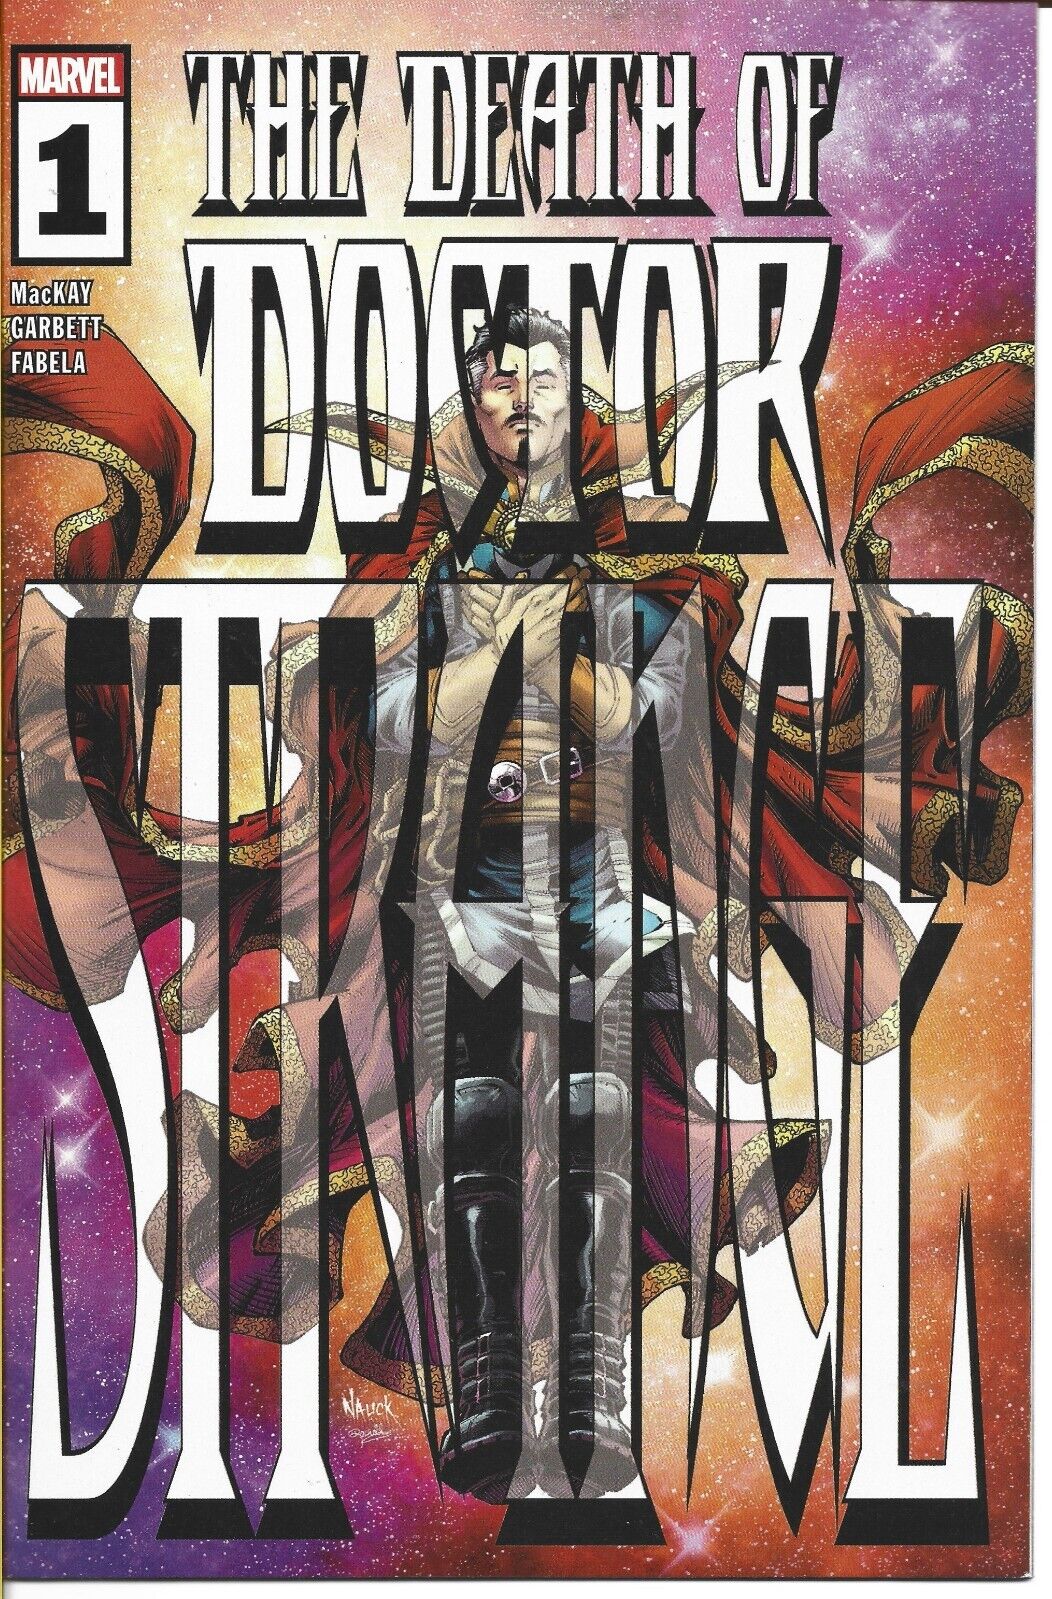 DEATH OF DR STRANGE #1 WALMART EXCLUSIVE COVER MARVEL COMICS 2021 BAGGED/BOARDED